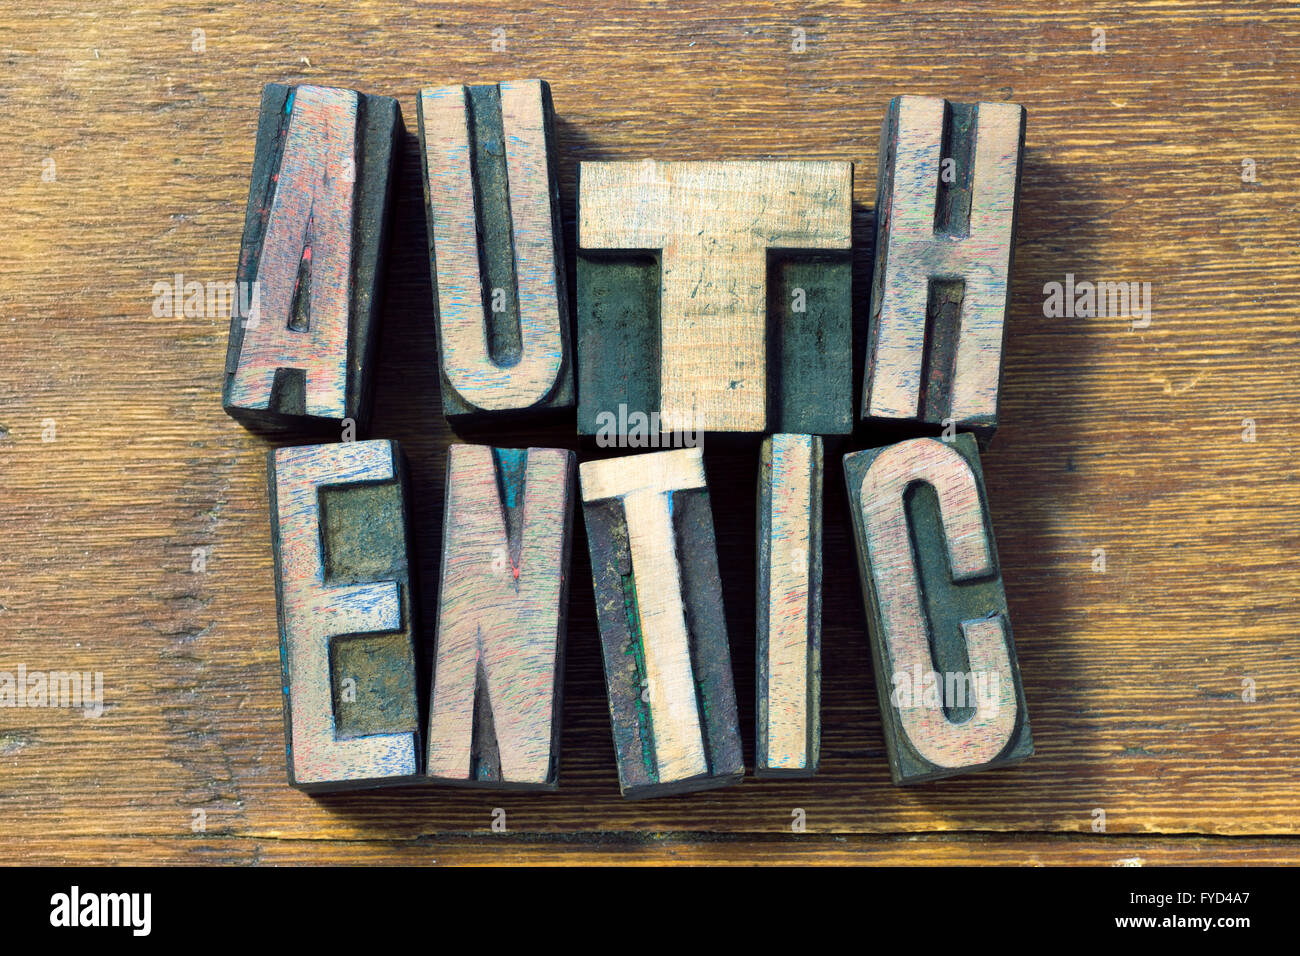 authentic word made from wooden letterpress type on grunge wood Stock Photo